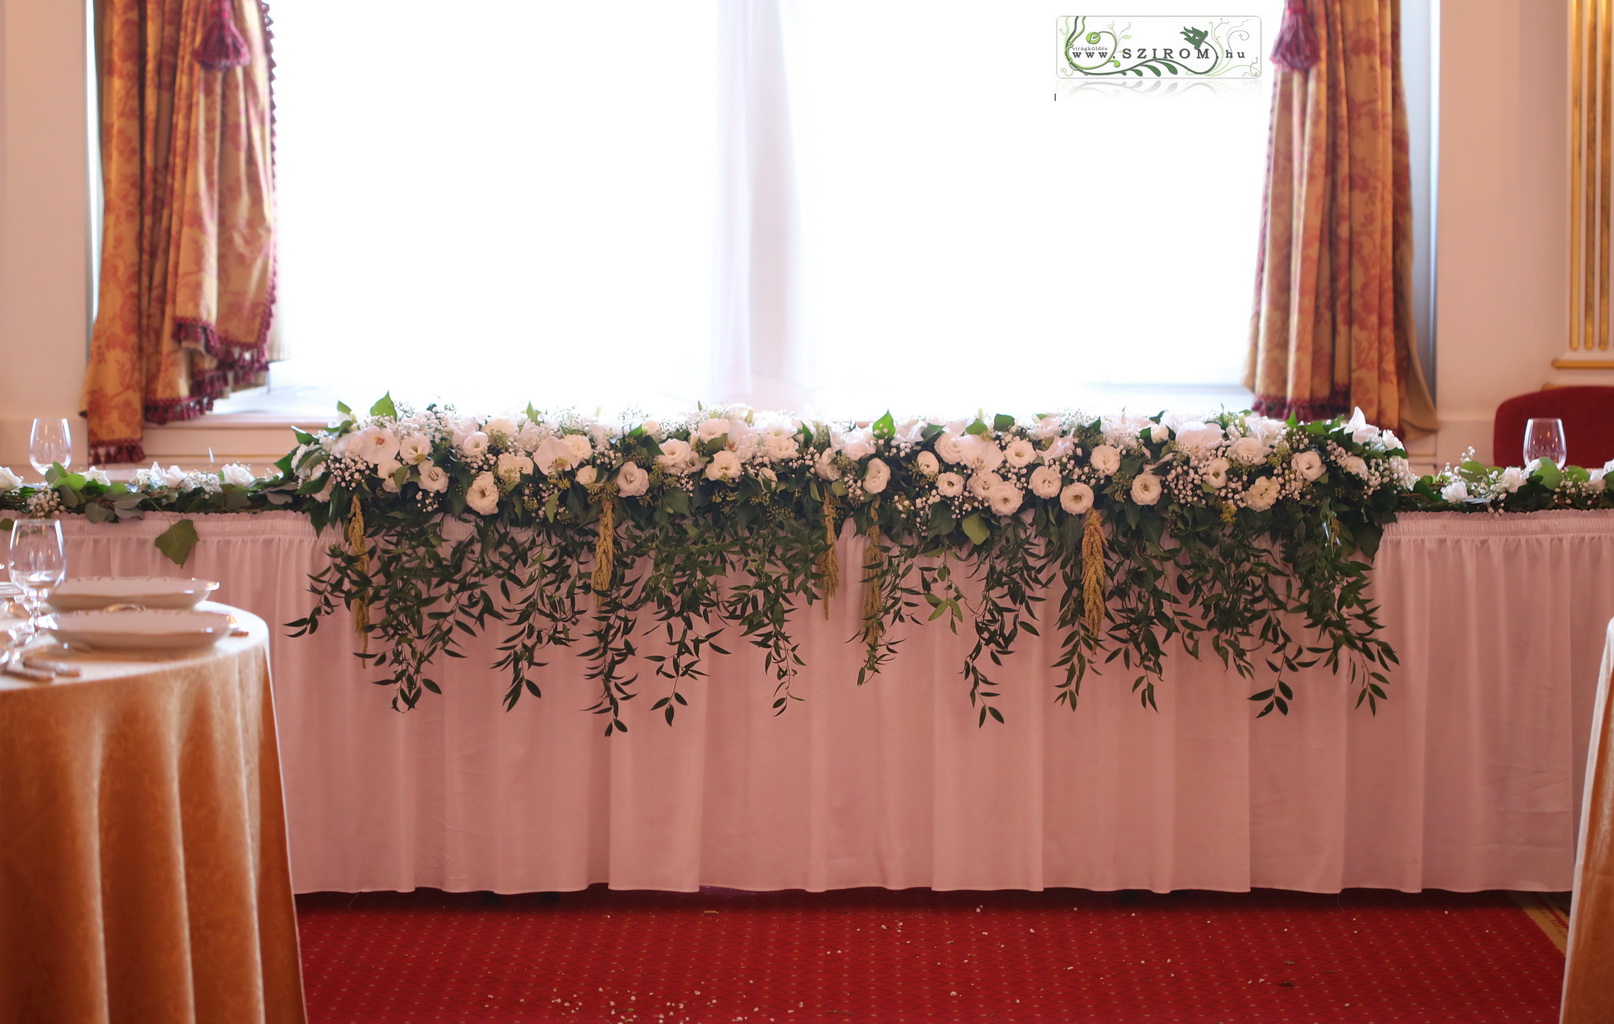 flower delivery Budapest - Main table centerpiece (lisianthus, phalaenopsis orchid, babybreath, ruscus, white) Gundel